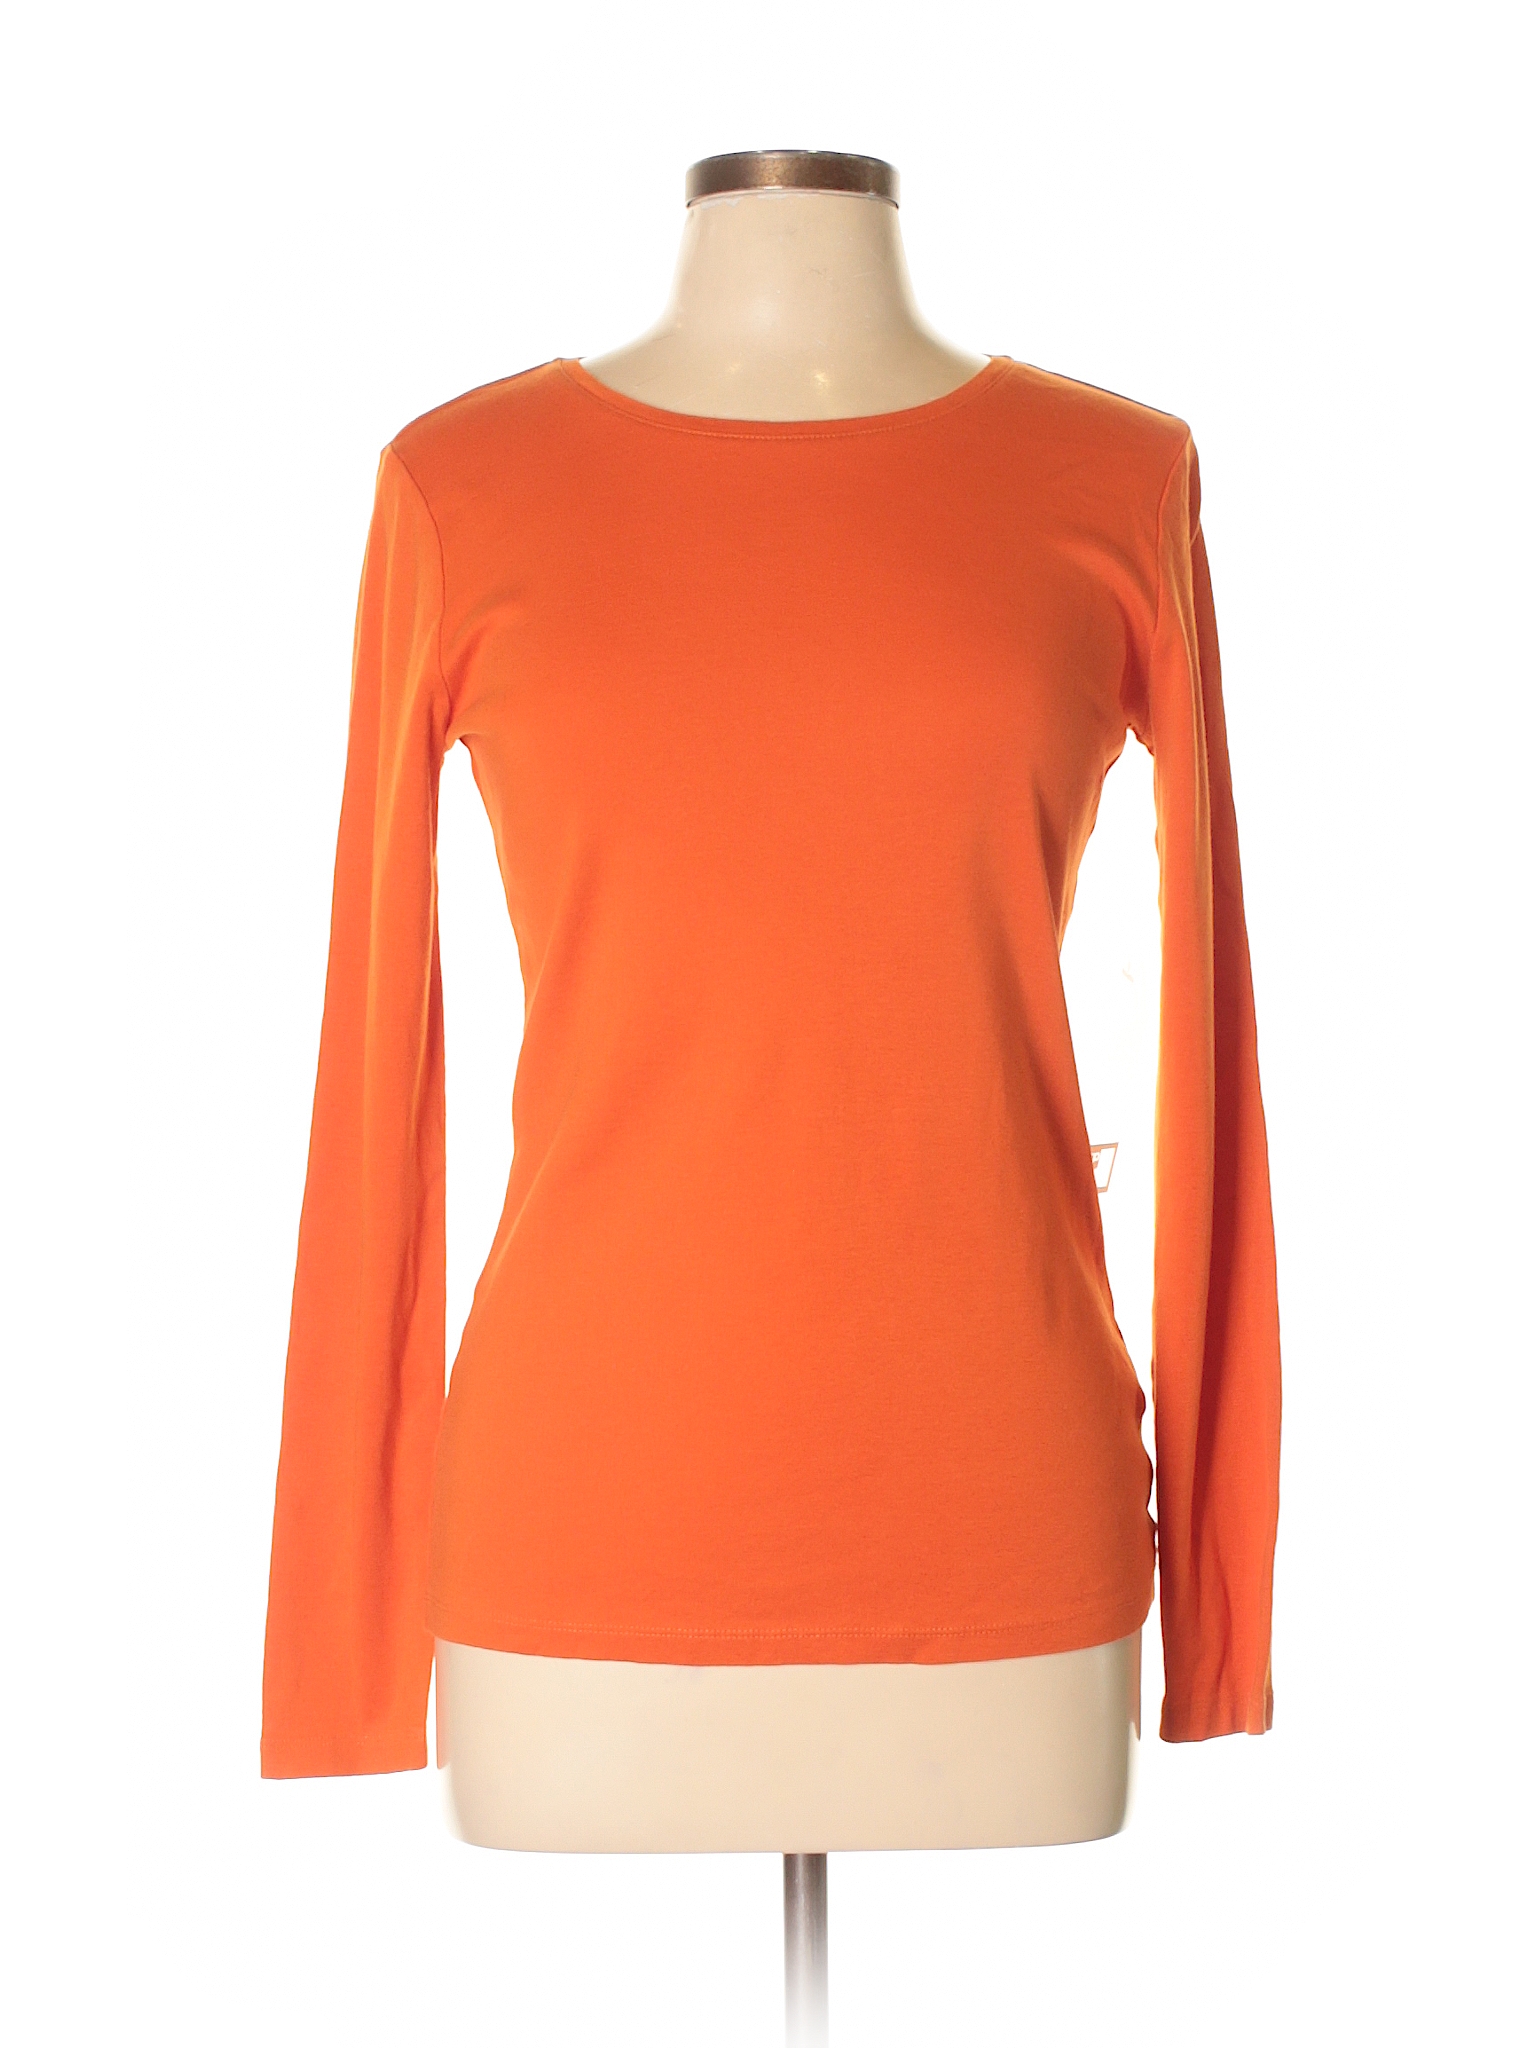 JCPenney 100% Cotton Solid Orange Long Sleeve T-Shirt Size L - 41% off ...